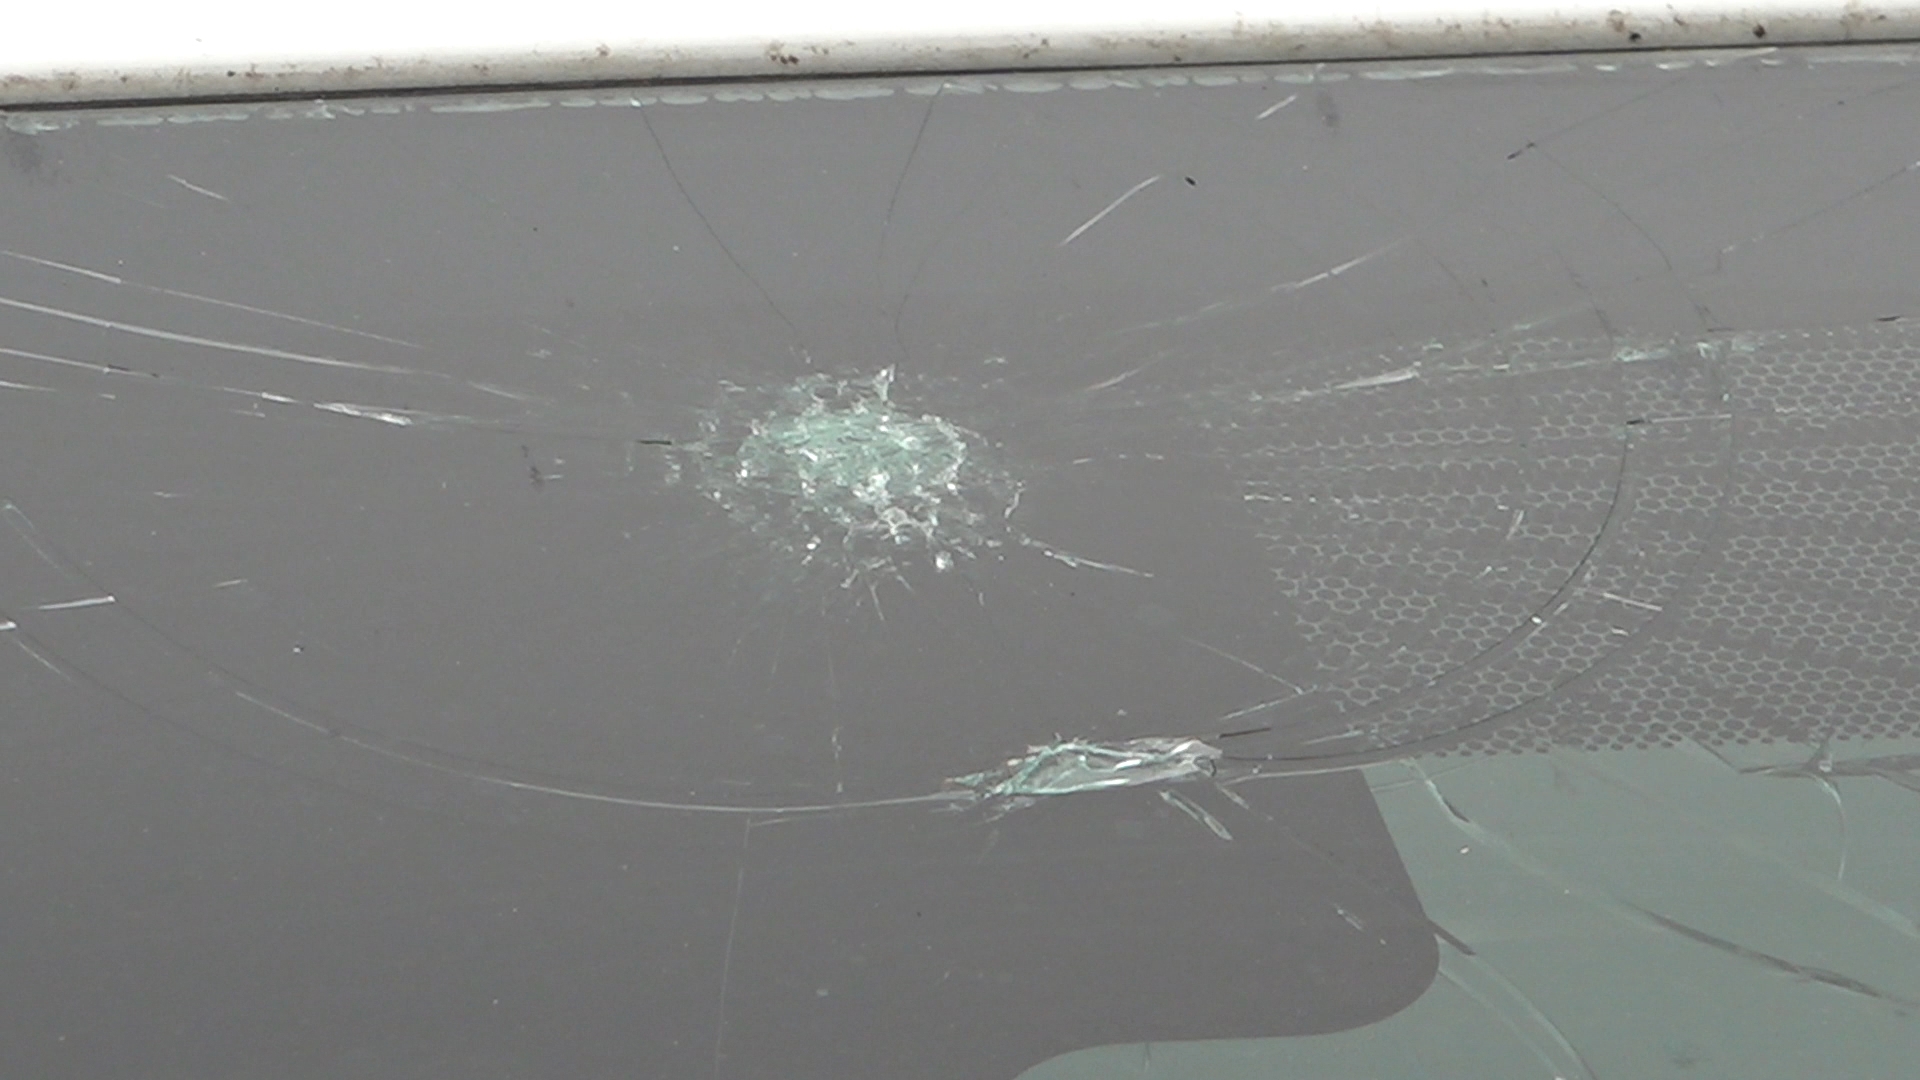 A San Angelo man needs his windshield replaced after a recent hailstorm. Abilene's Better Business Bureau warns people seeking repairs to watch out for scammers.